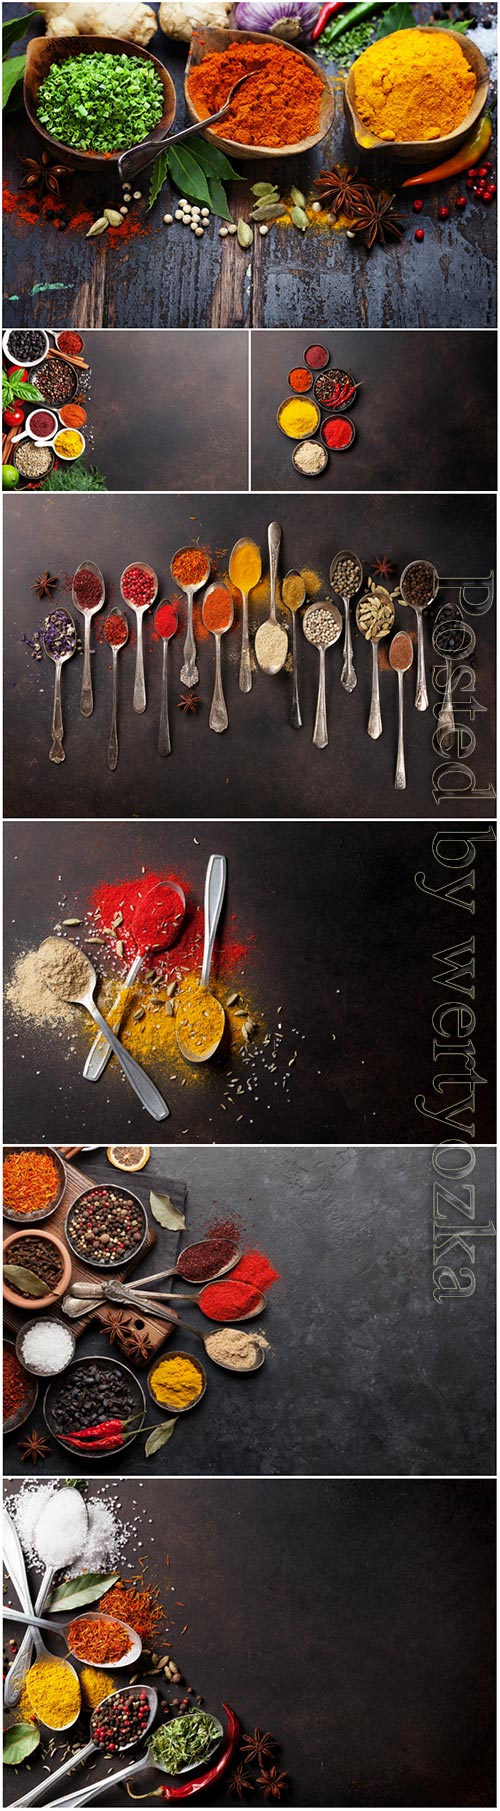 Spices on stone table stock photo